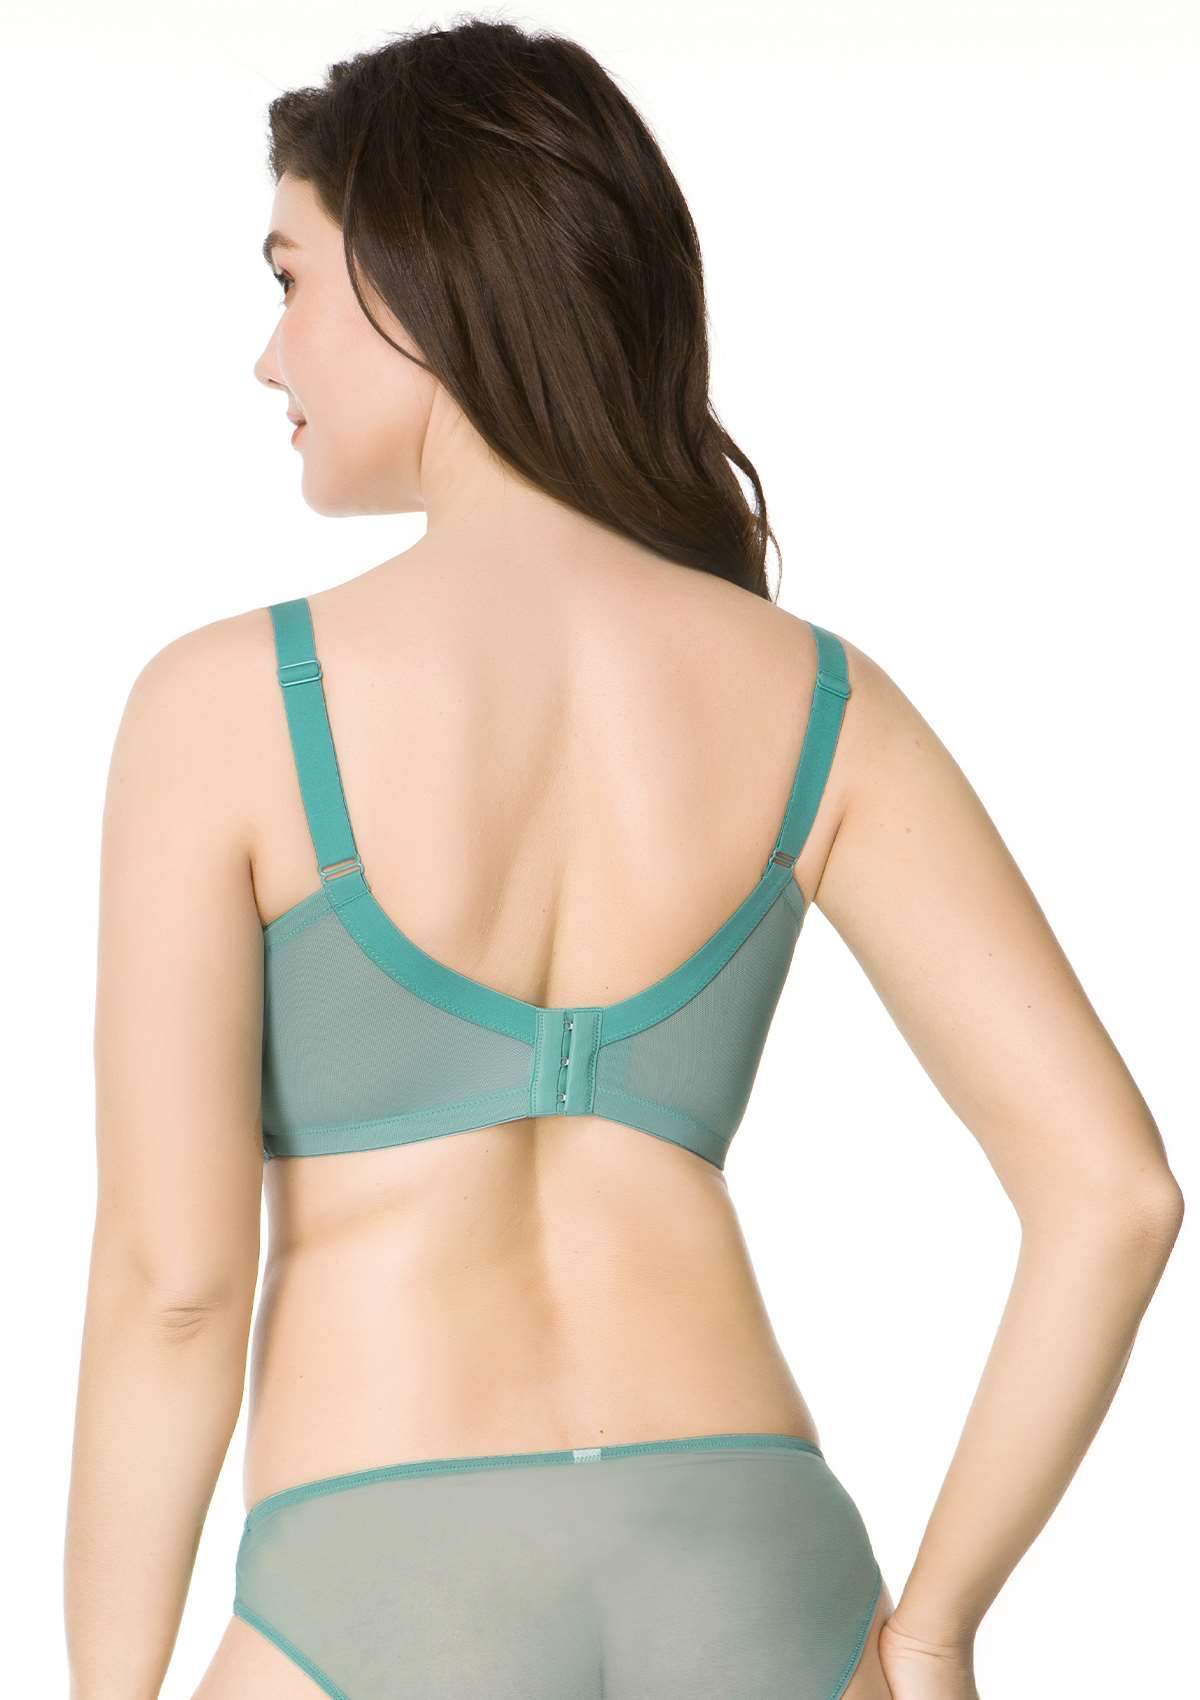 HSIA Paeonia Lace Full Coverage Underwire Non-Padded Uplifting Bra - Teal / 38 / DDD/F